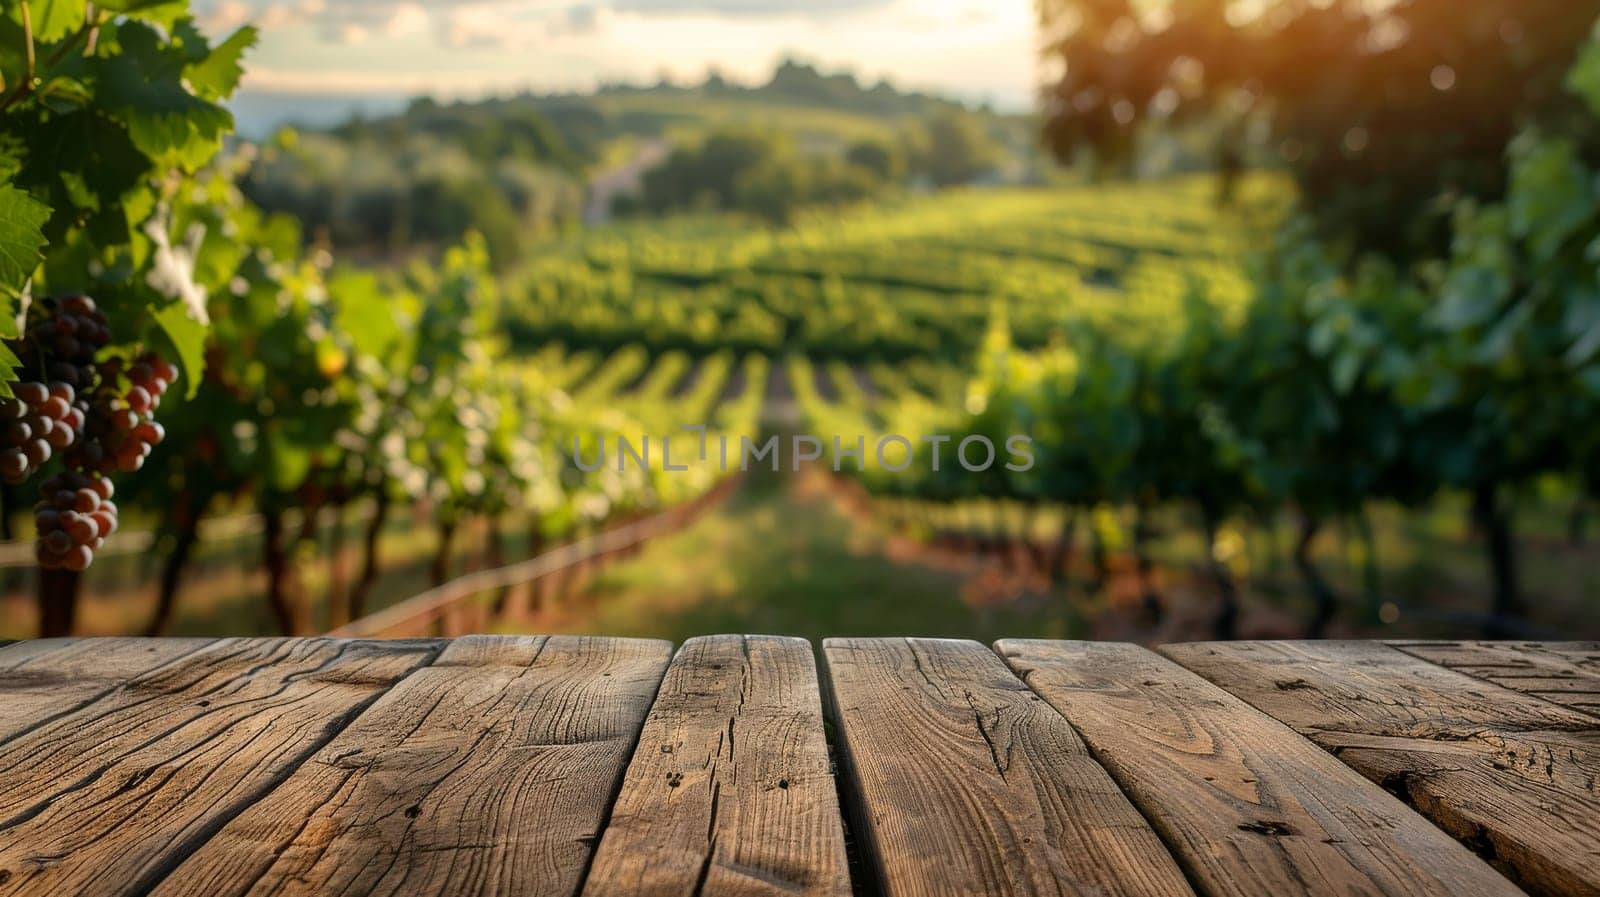 A vineyard with a wooden table in the foreground by itchaznong